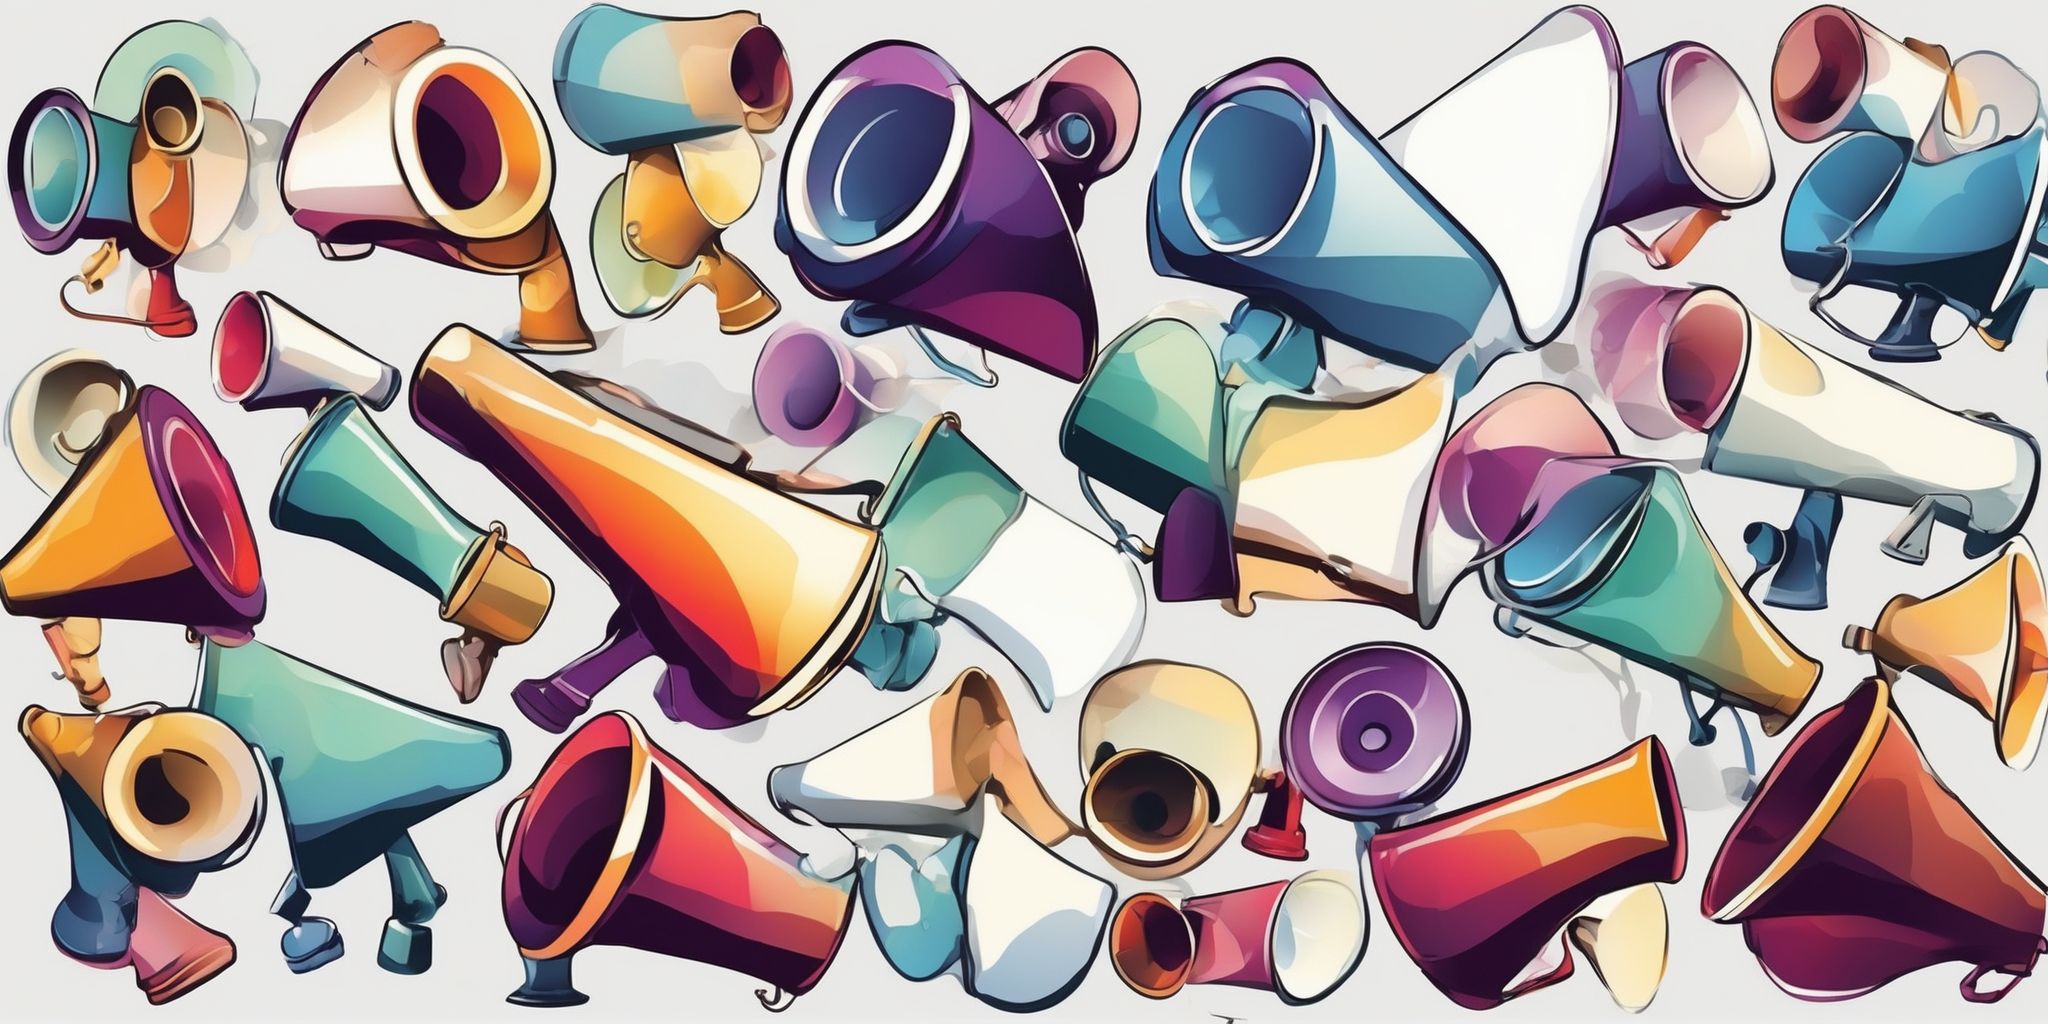 Megaphone in illustration style with gradients and white background